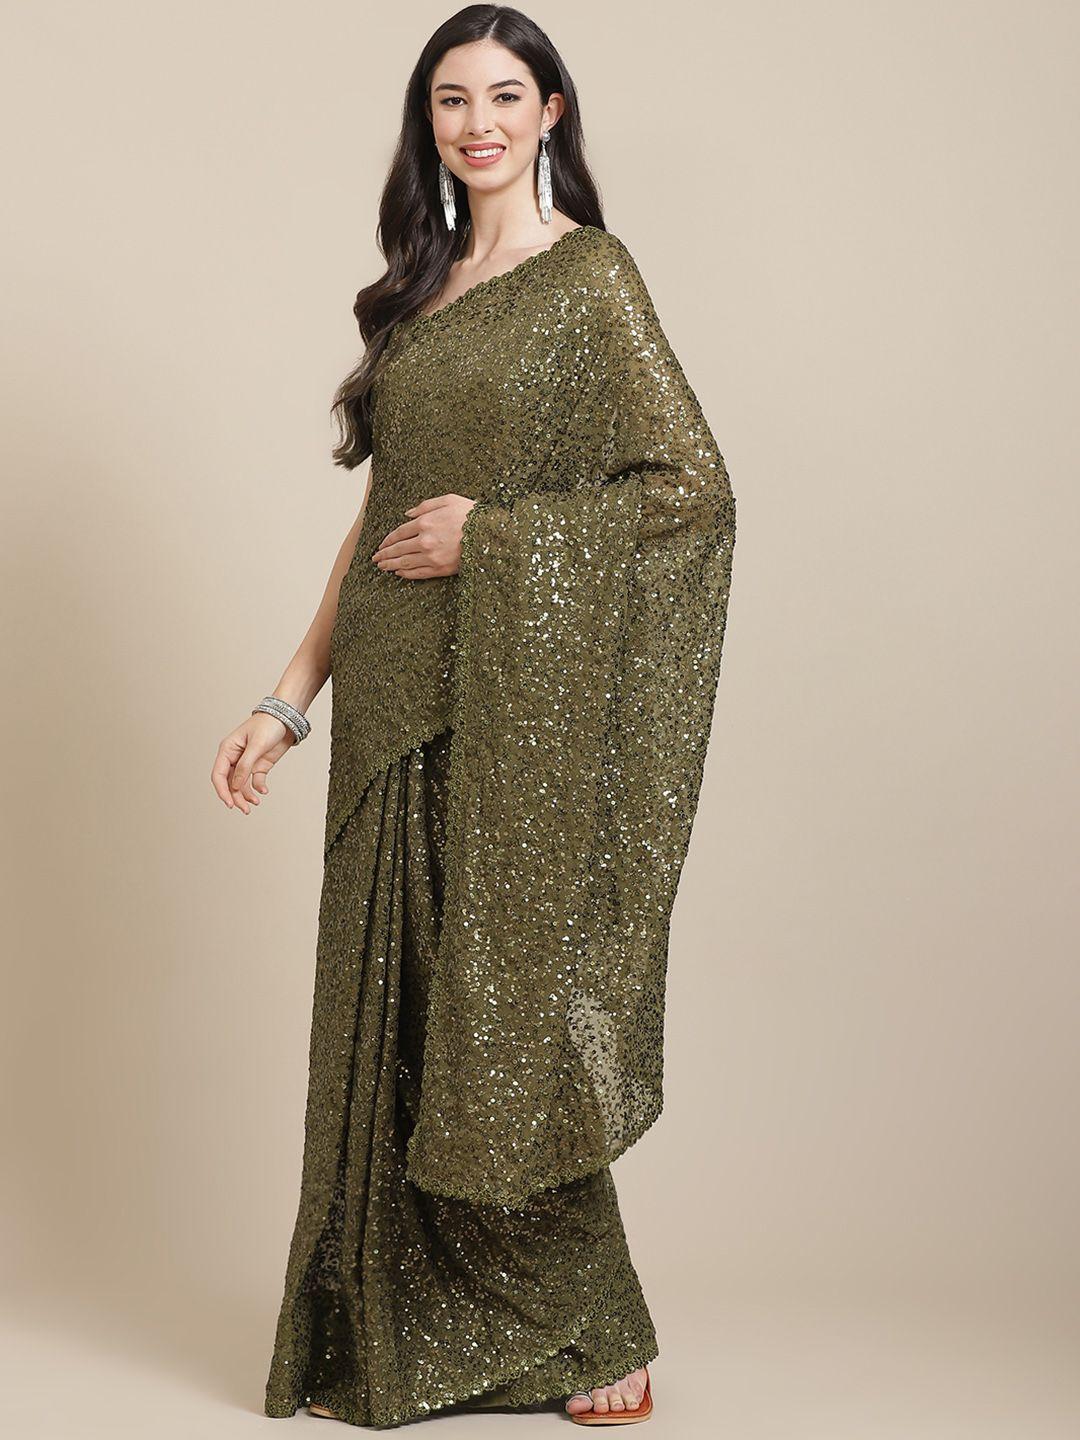 readiprint fashions olive green sequinned pure georgette heavy work saree